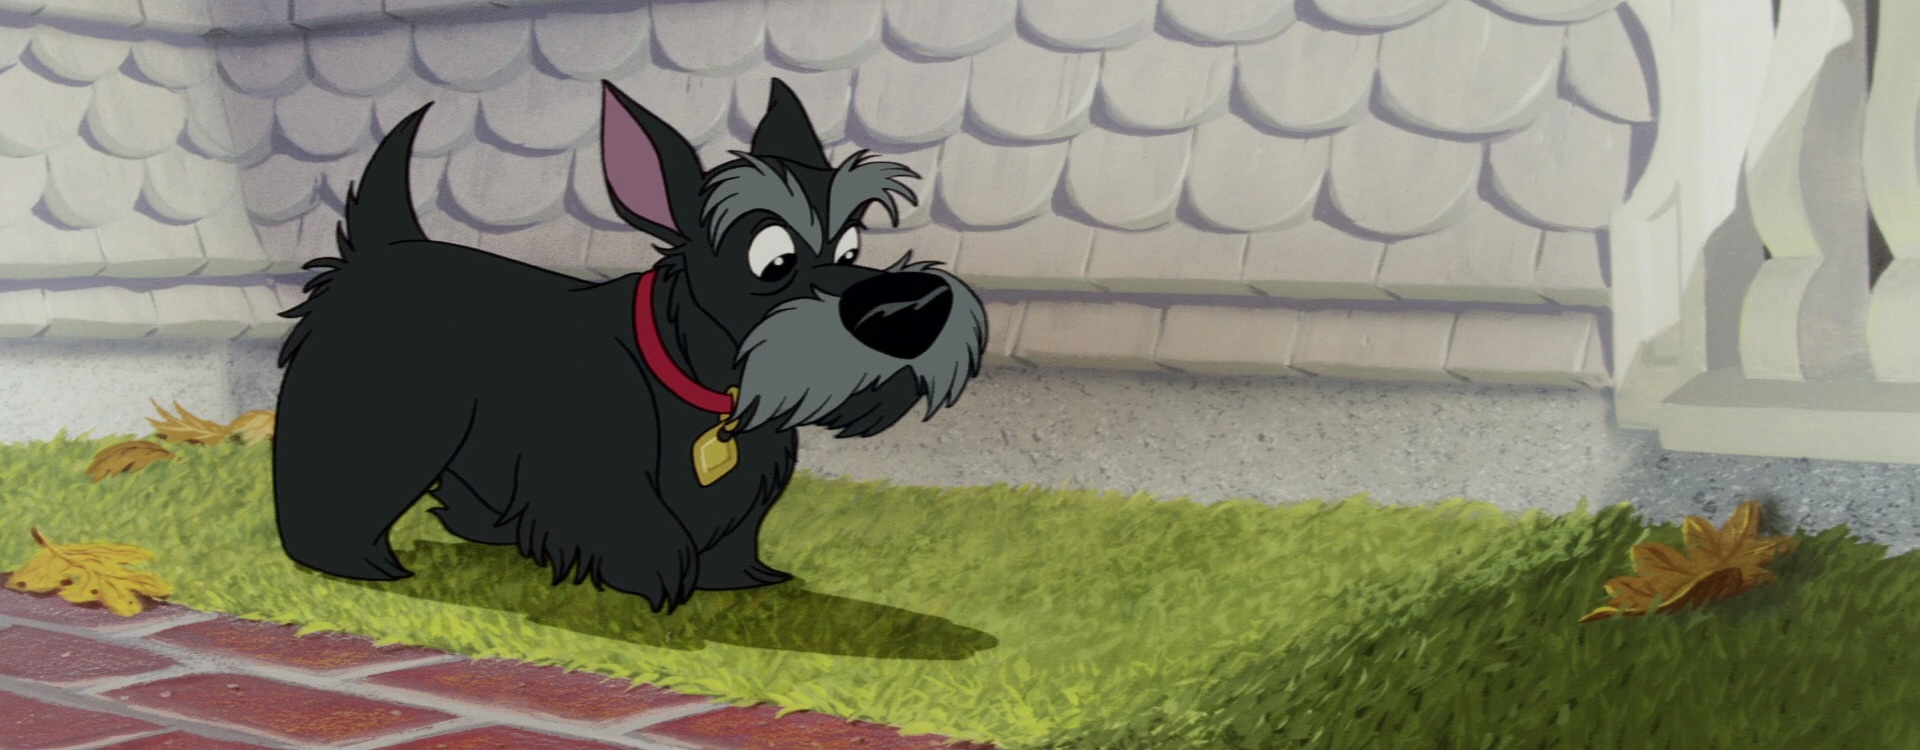 Which dog breed do you like best that was in a Disney